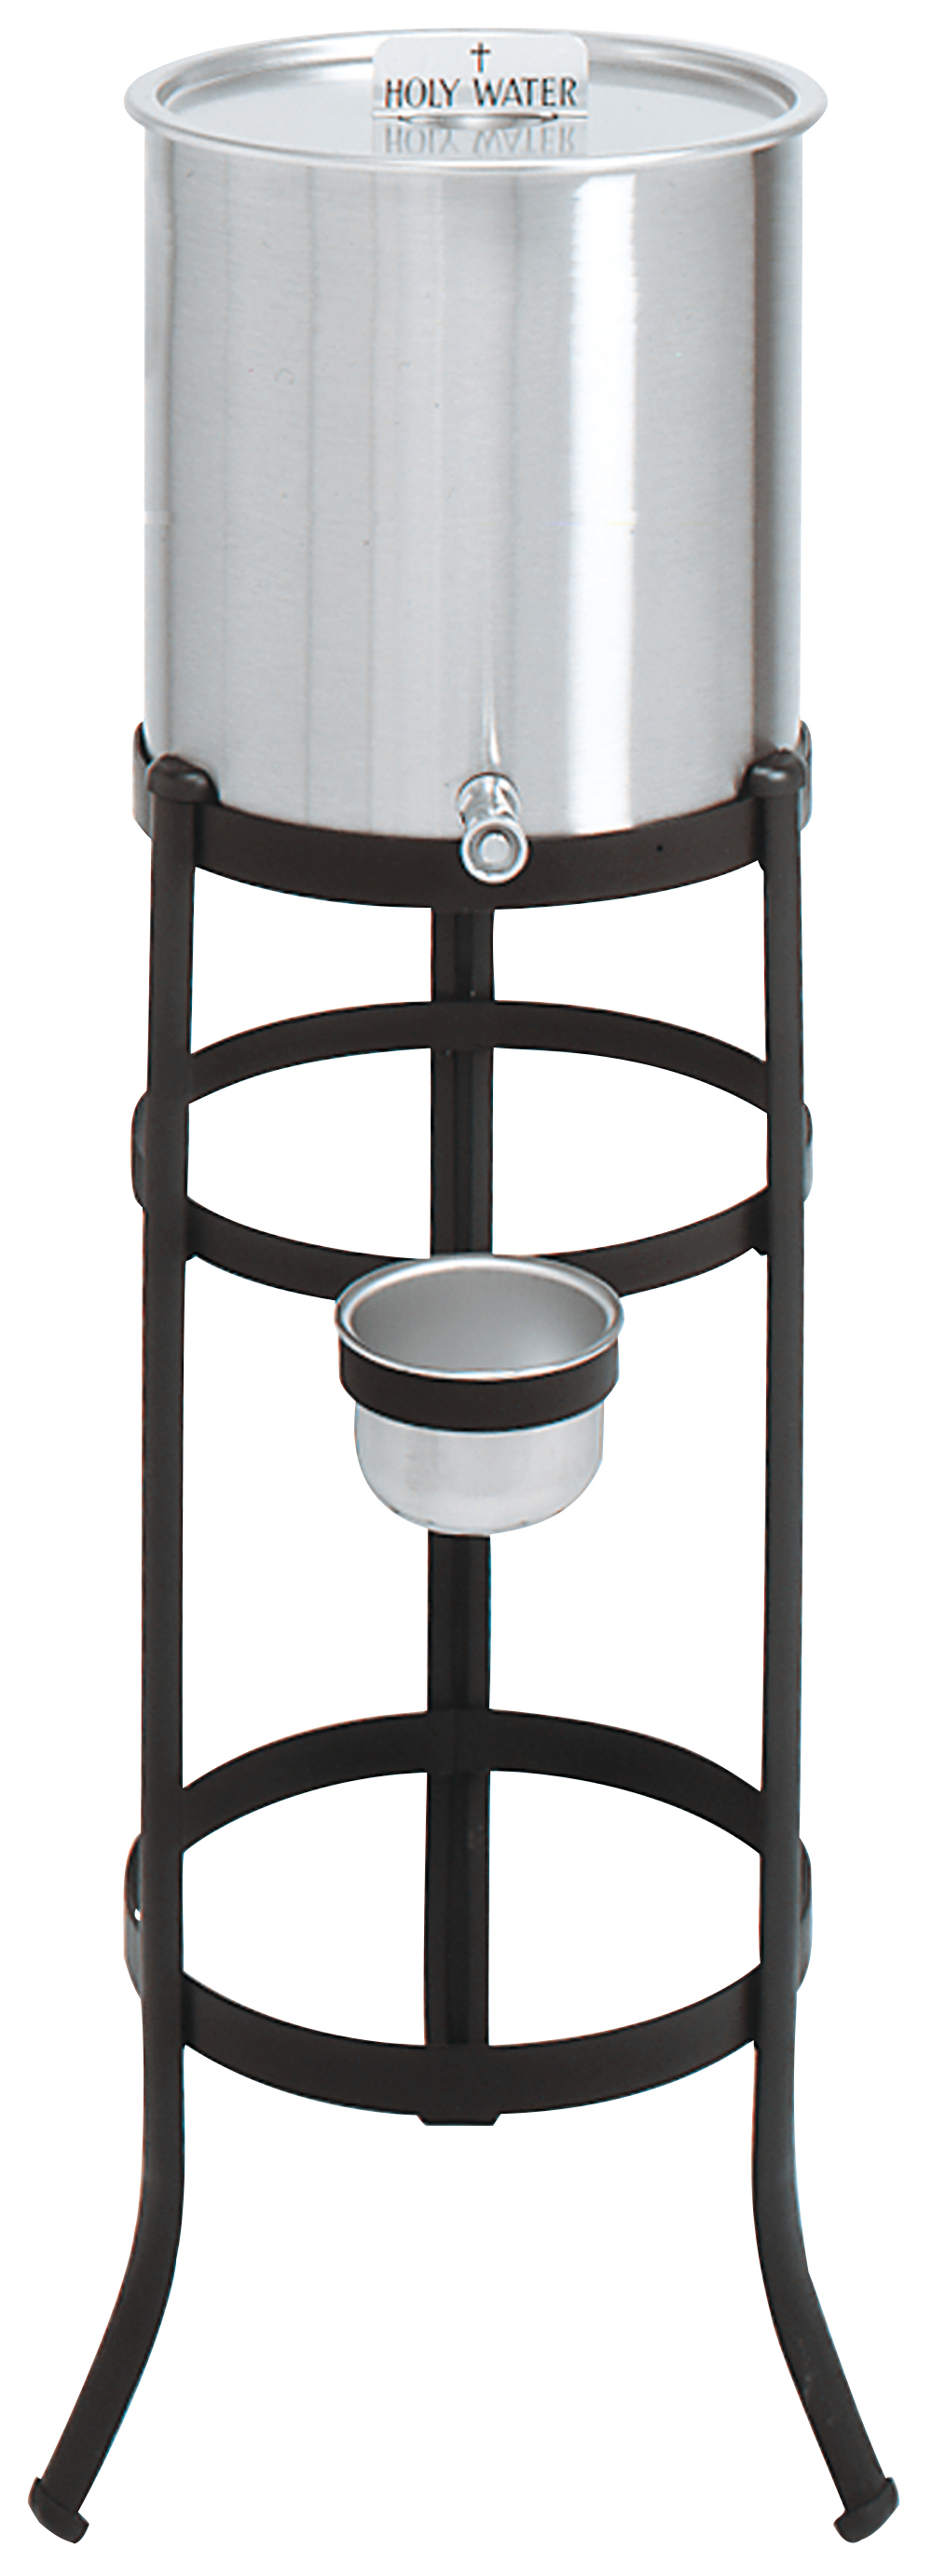 Holy Water Tank with Stand Black Aluminum